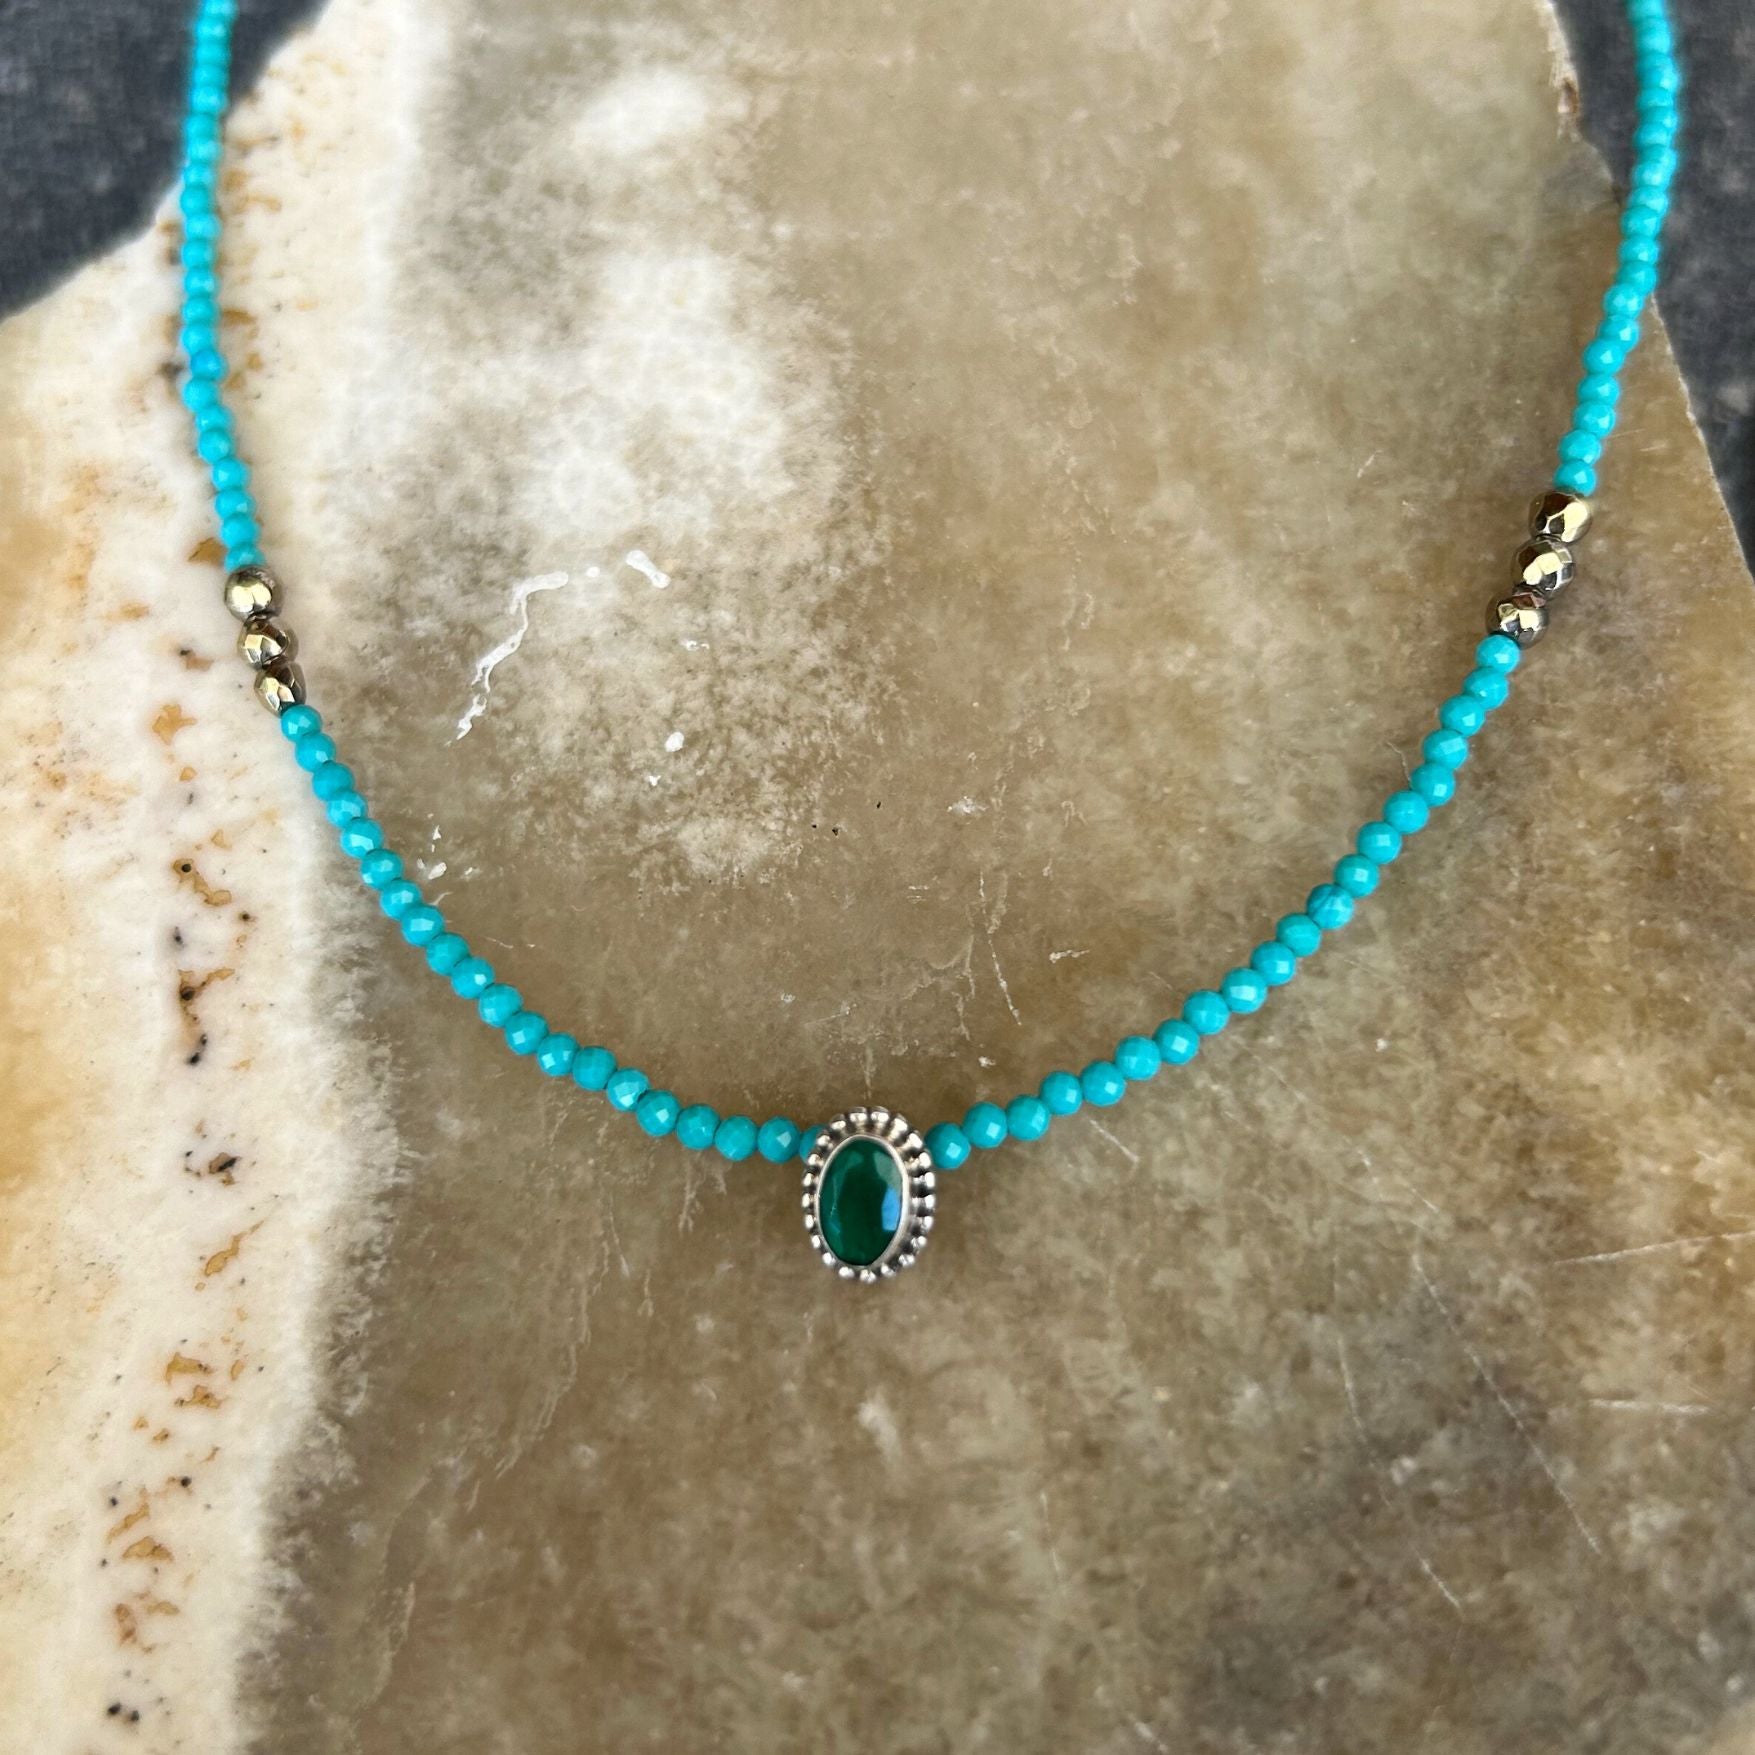 Turquoise & Green Onyx Bead Necklace